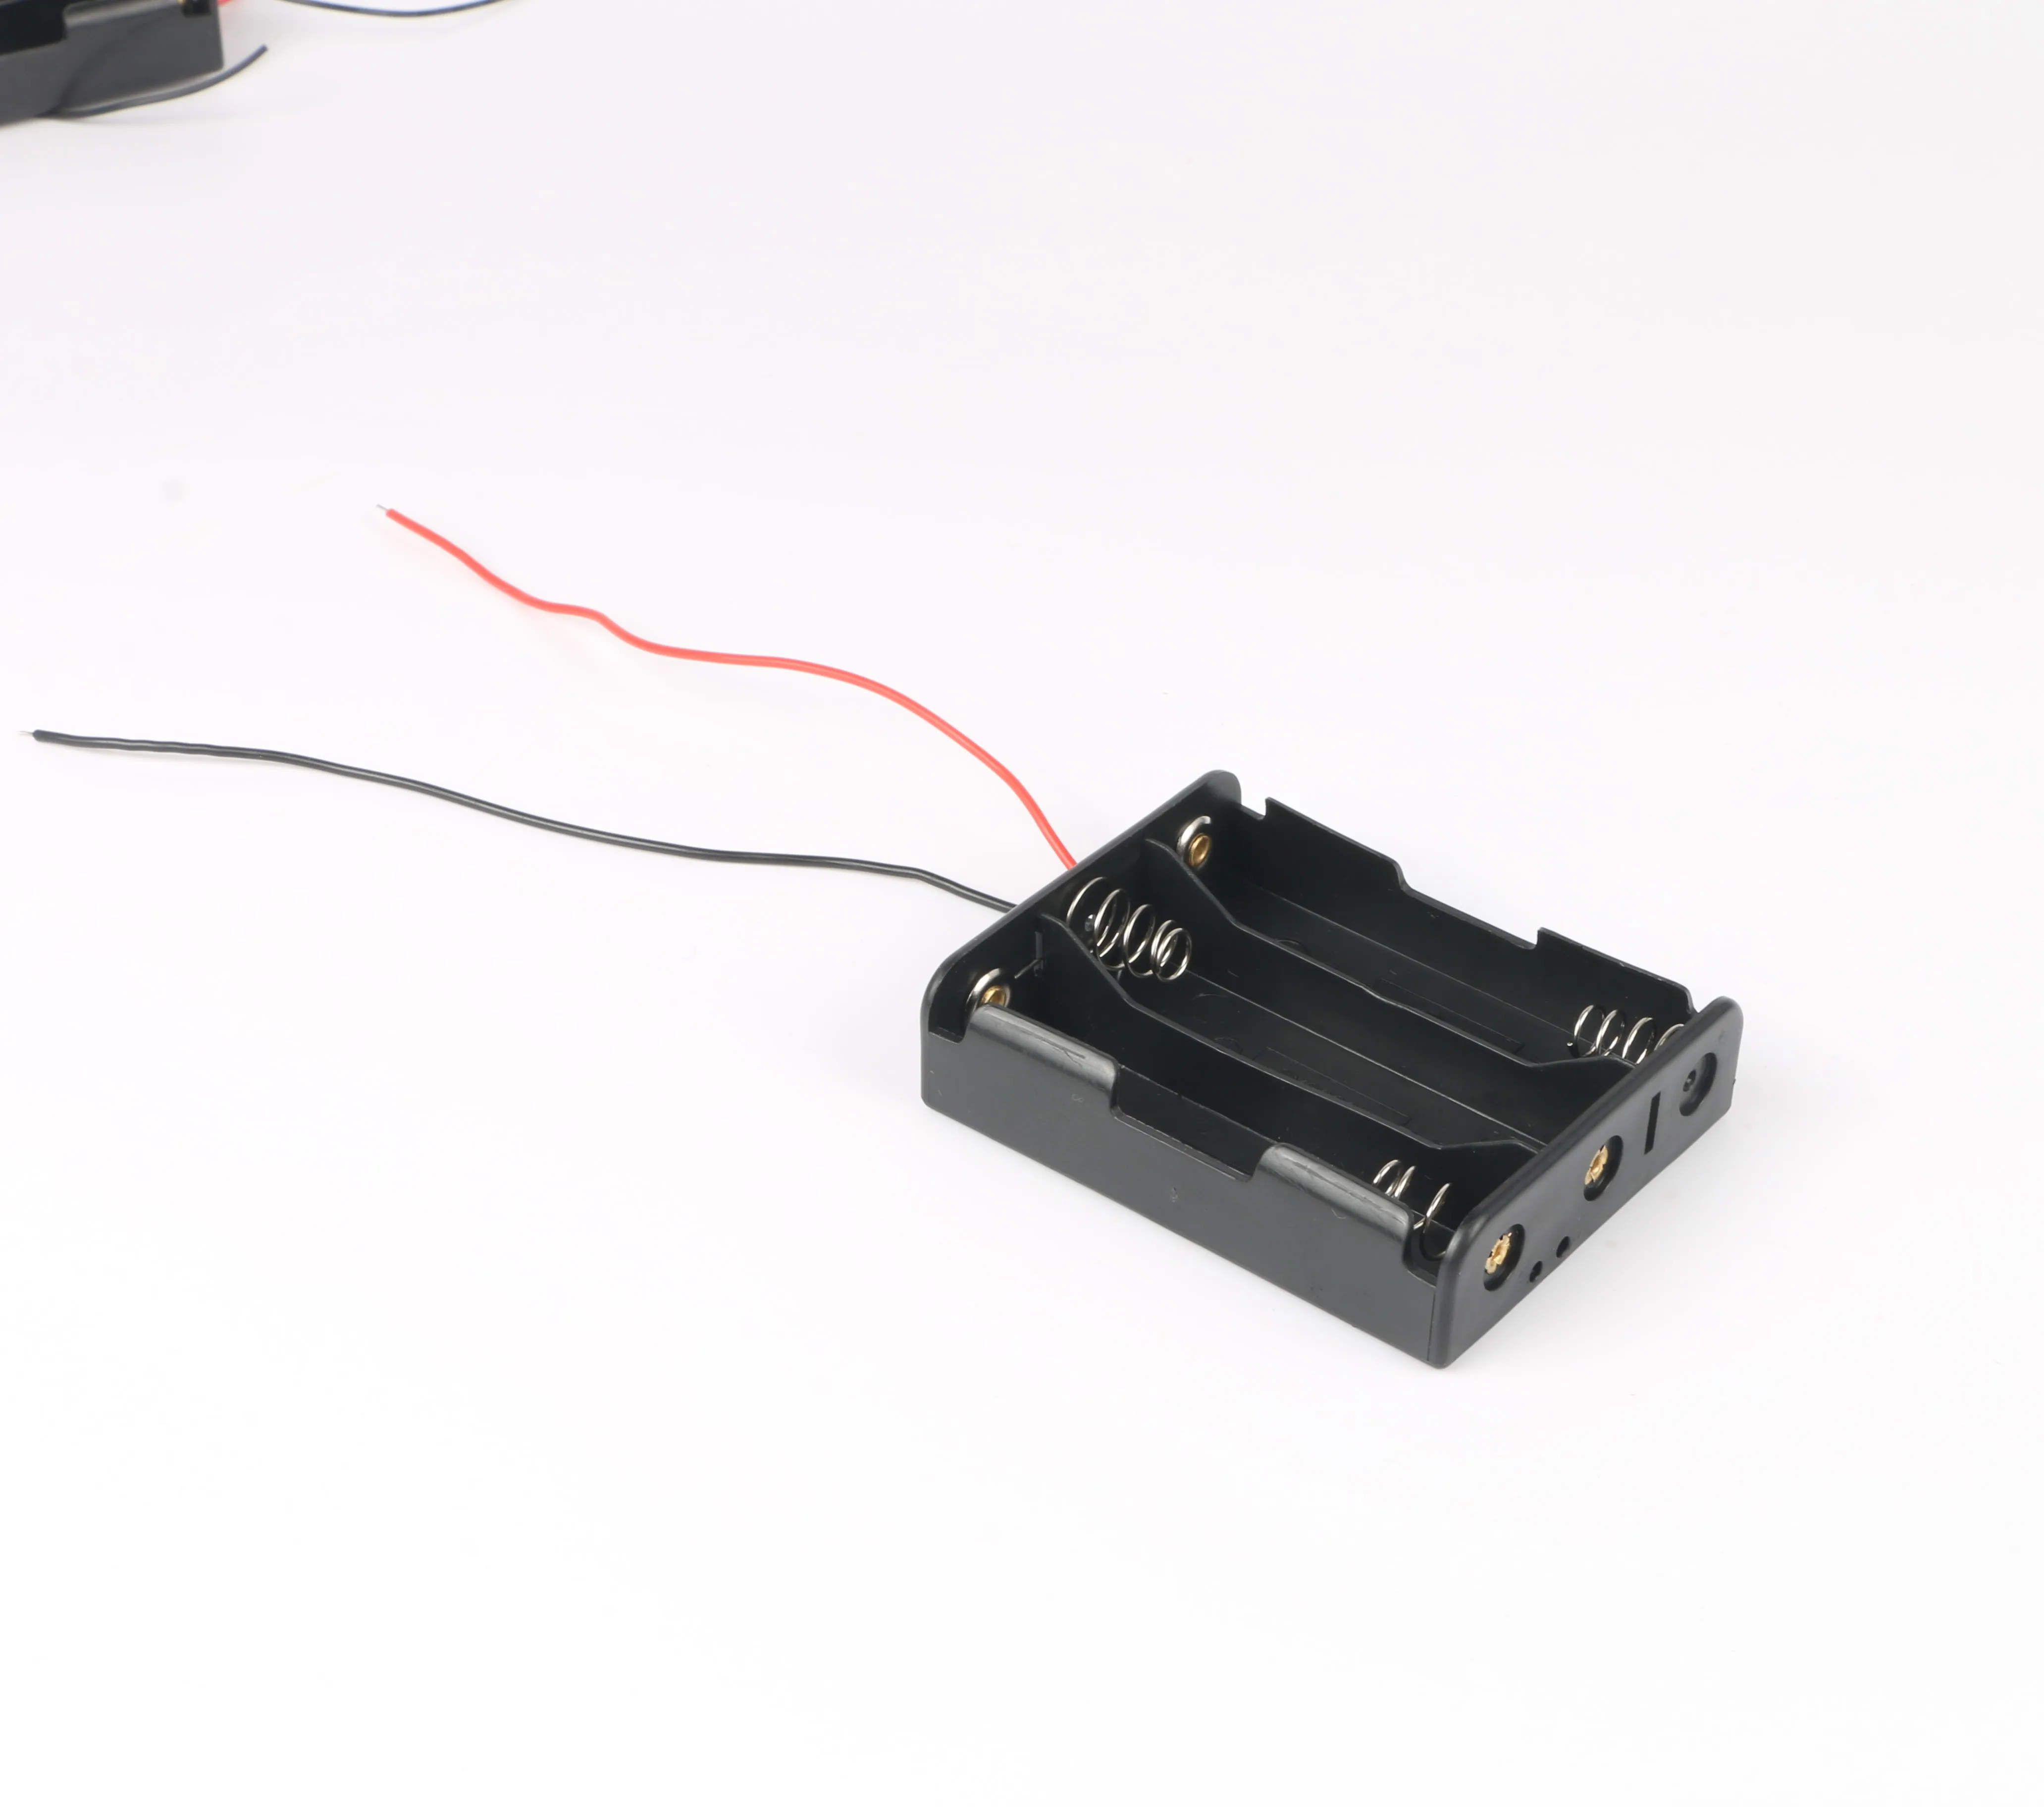 Drei 18650 battery boxes with wires are connected in series